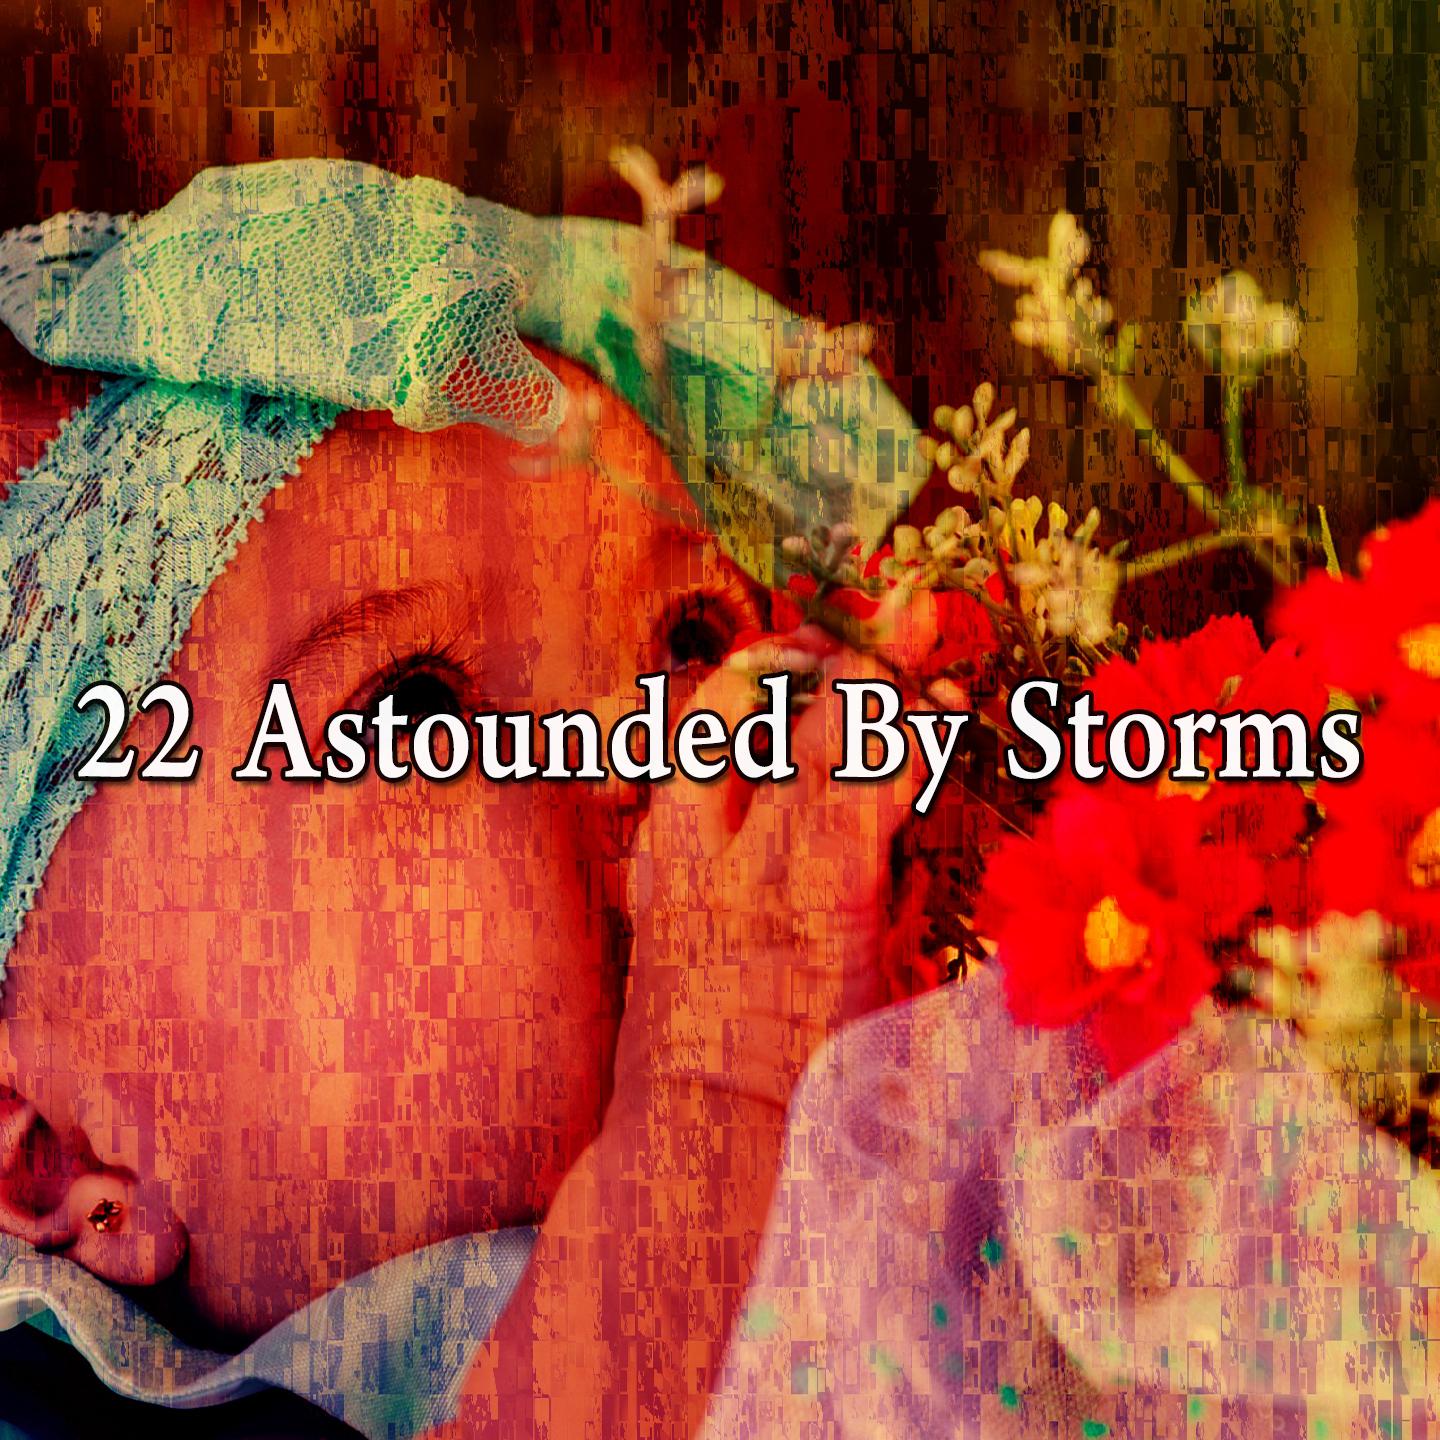 22 Astounded by Storms